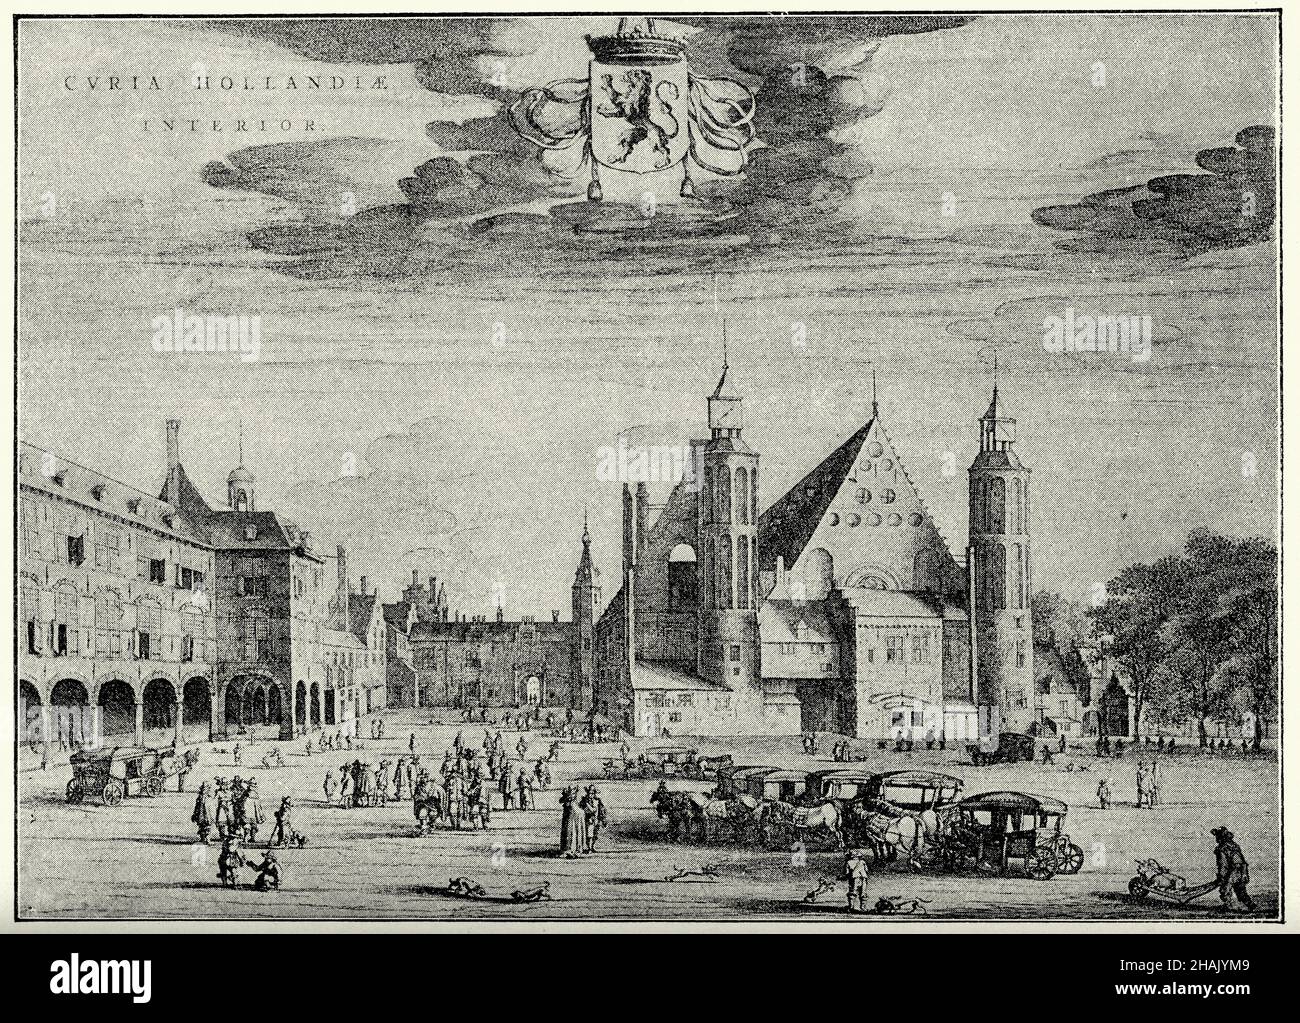 Courtyard of the Palace at the Hague, 17th Century Stock Photo